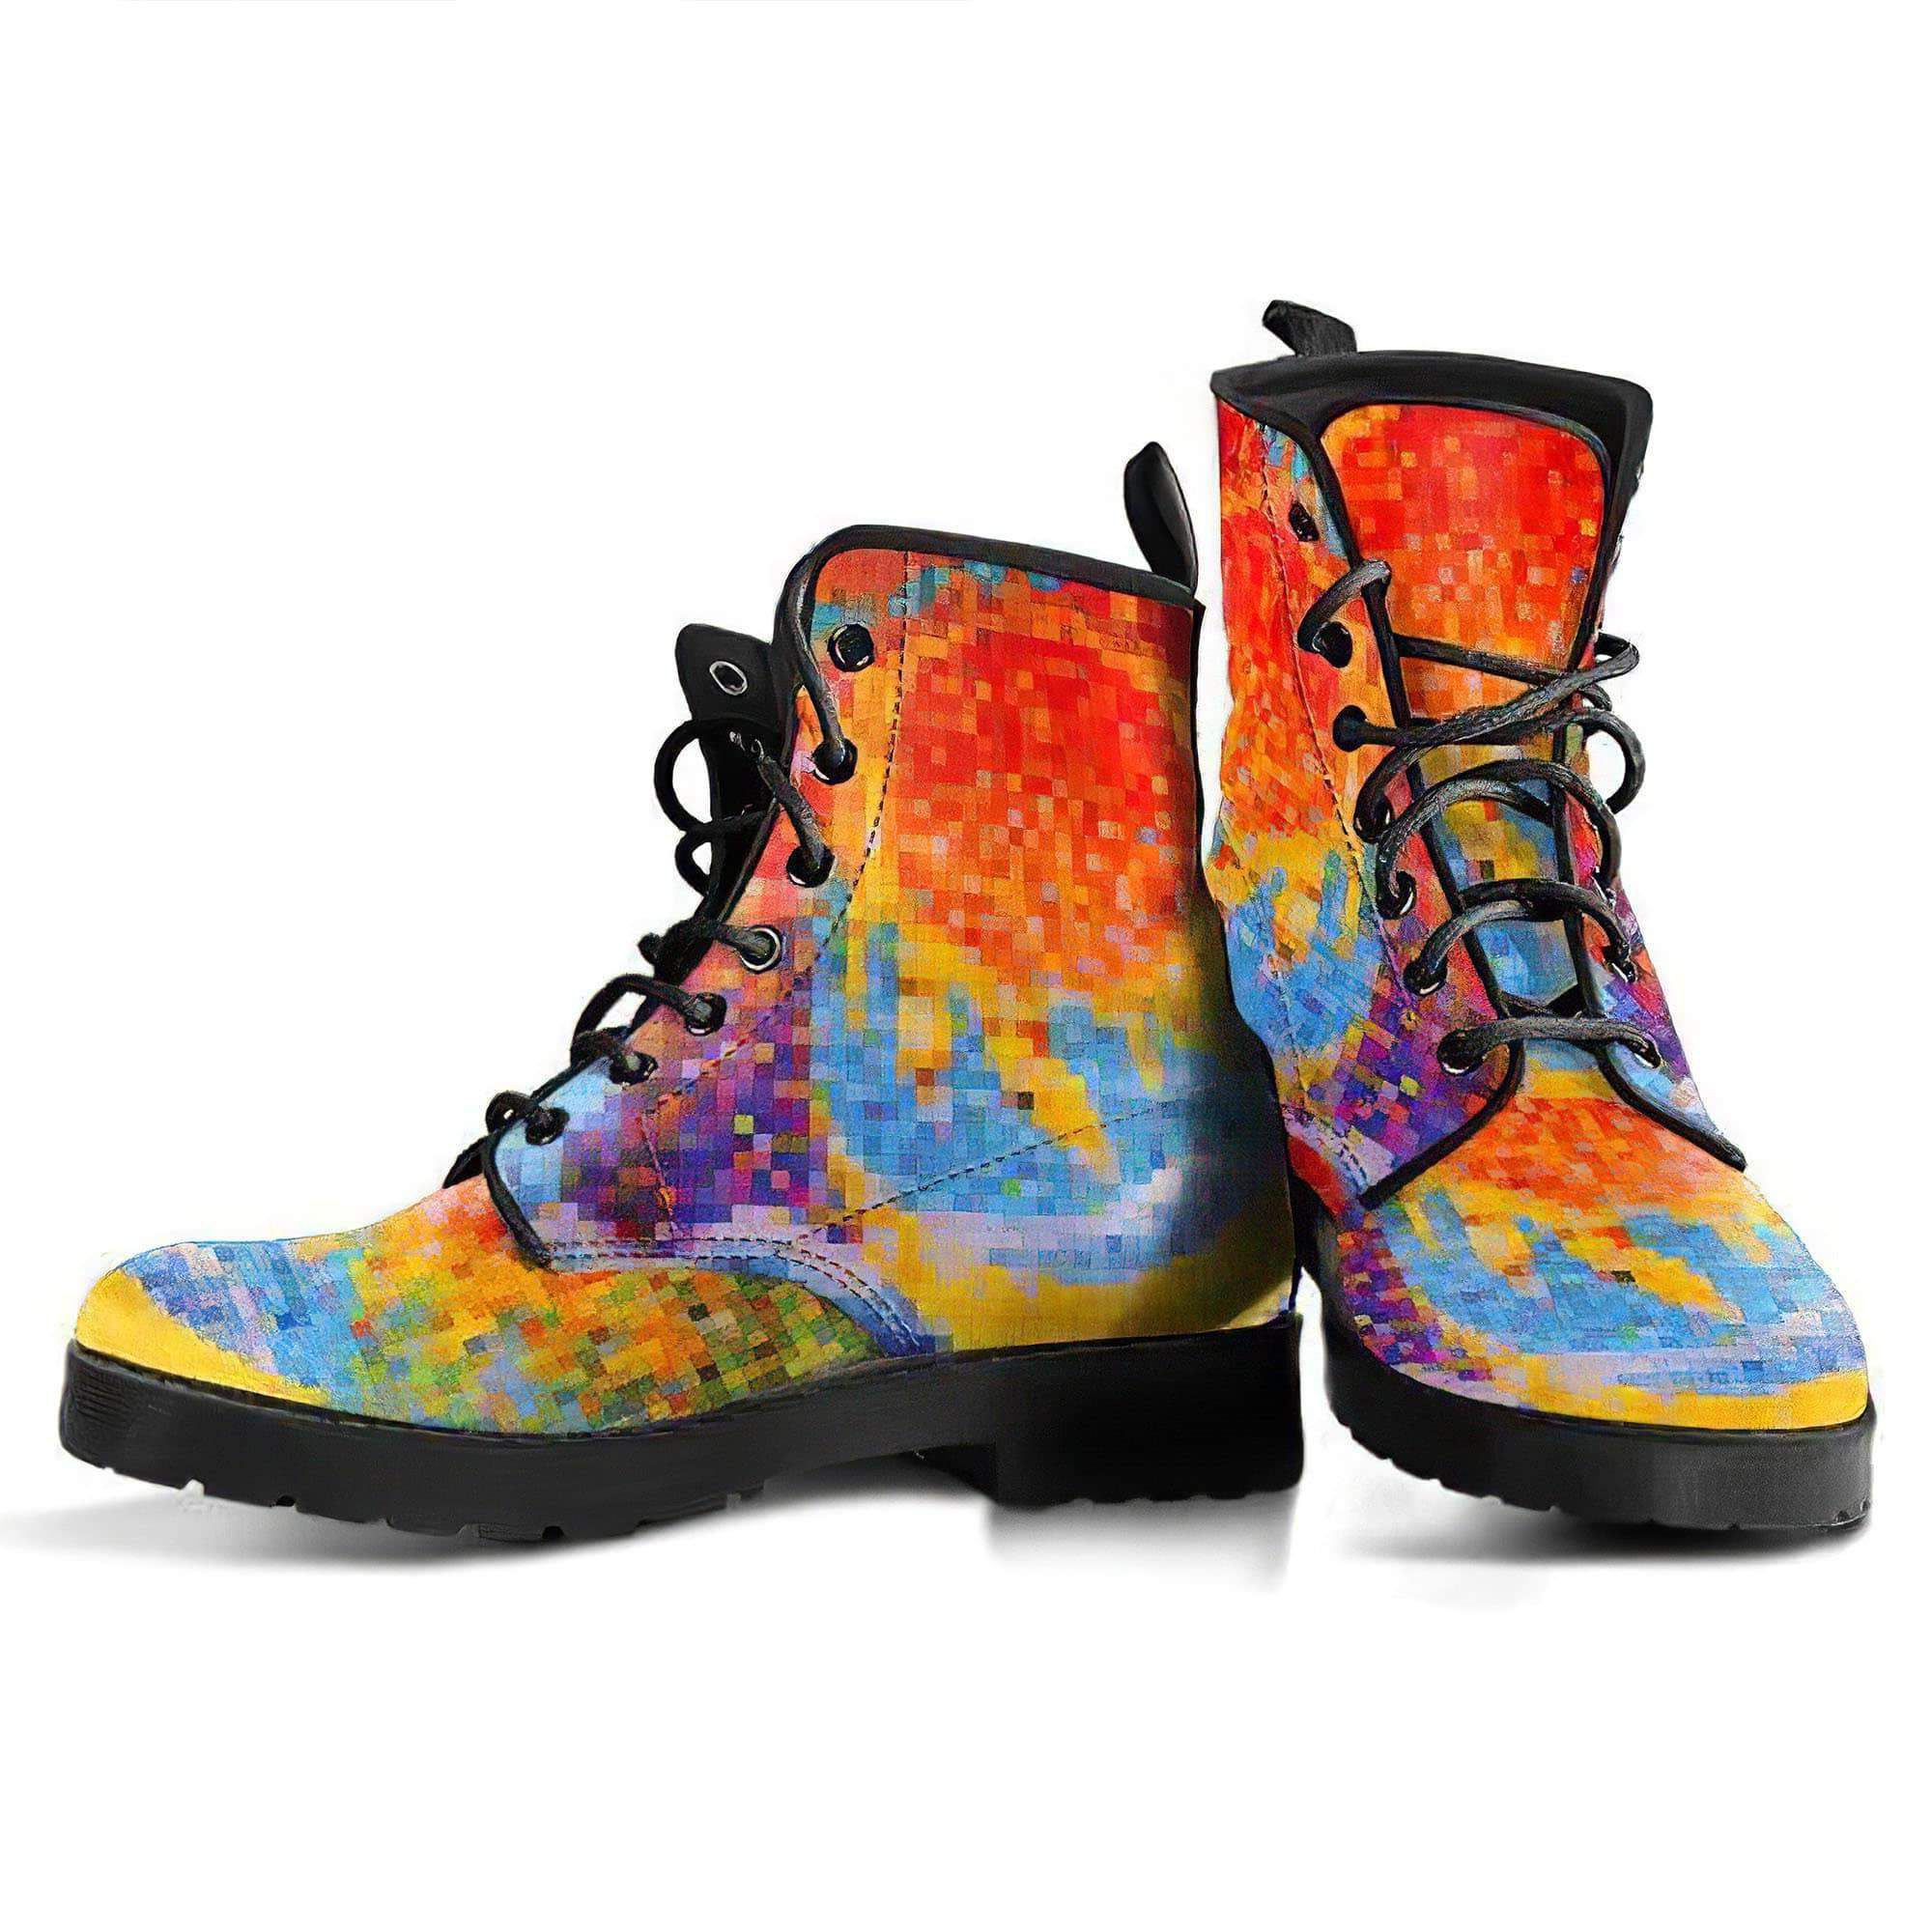 mosaic-sun-and-moon-women-s-leather-boots-women-s-leather-boots-12051913080893.jpg